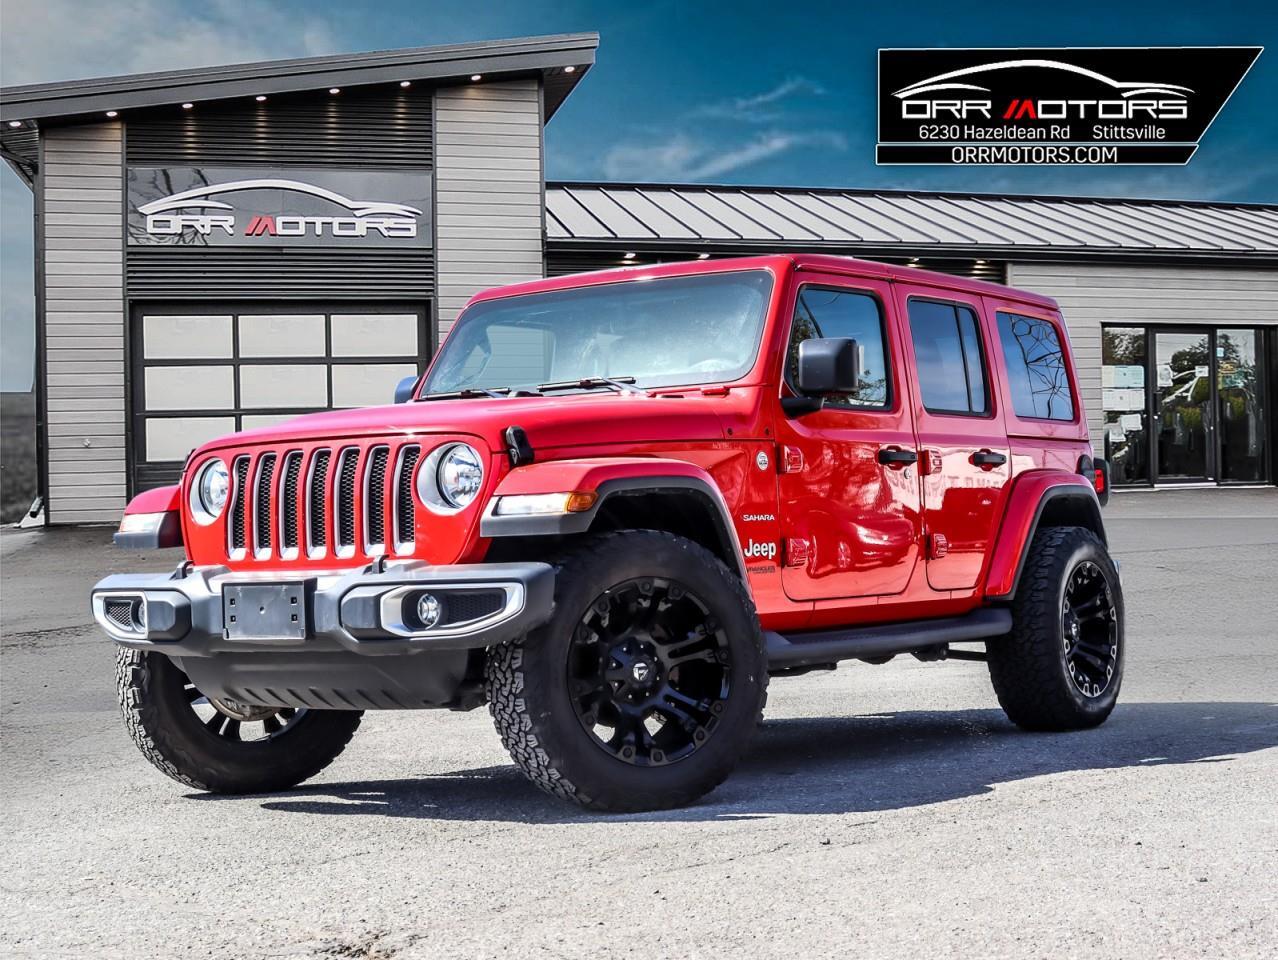 2022 Jeep WRANGLER UNLIMITED Sahara SOLD CERTIFIED AND IN EXCELLENT CONDITION!